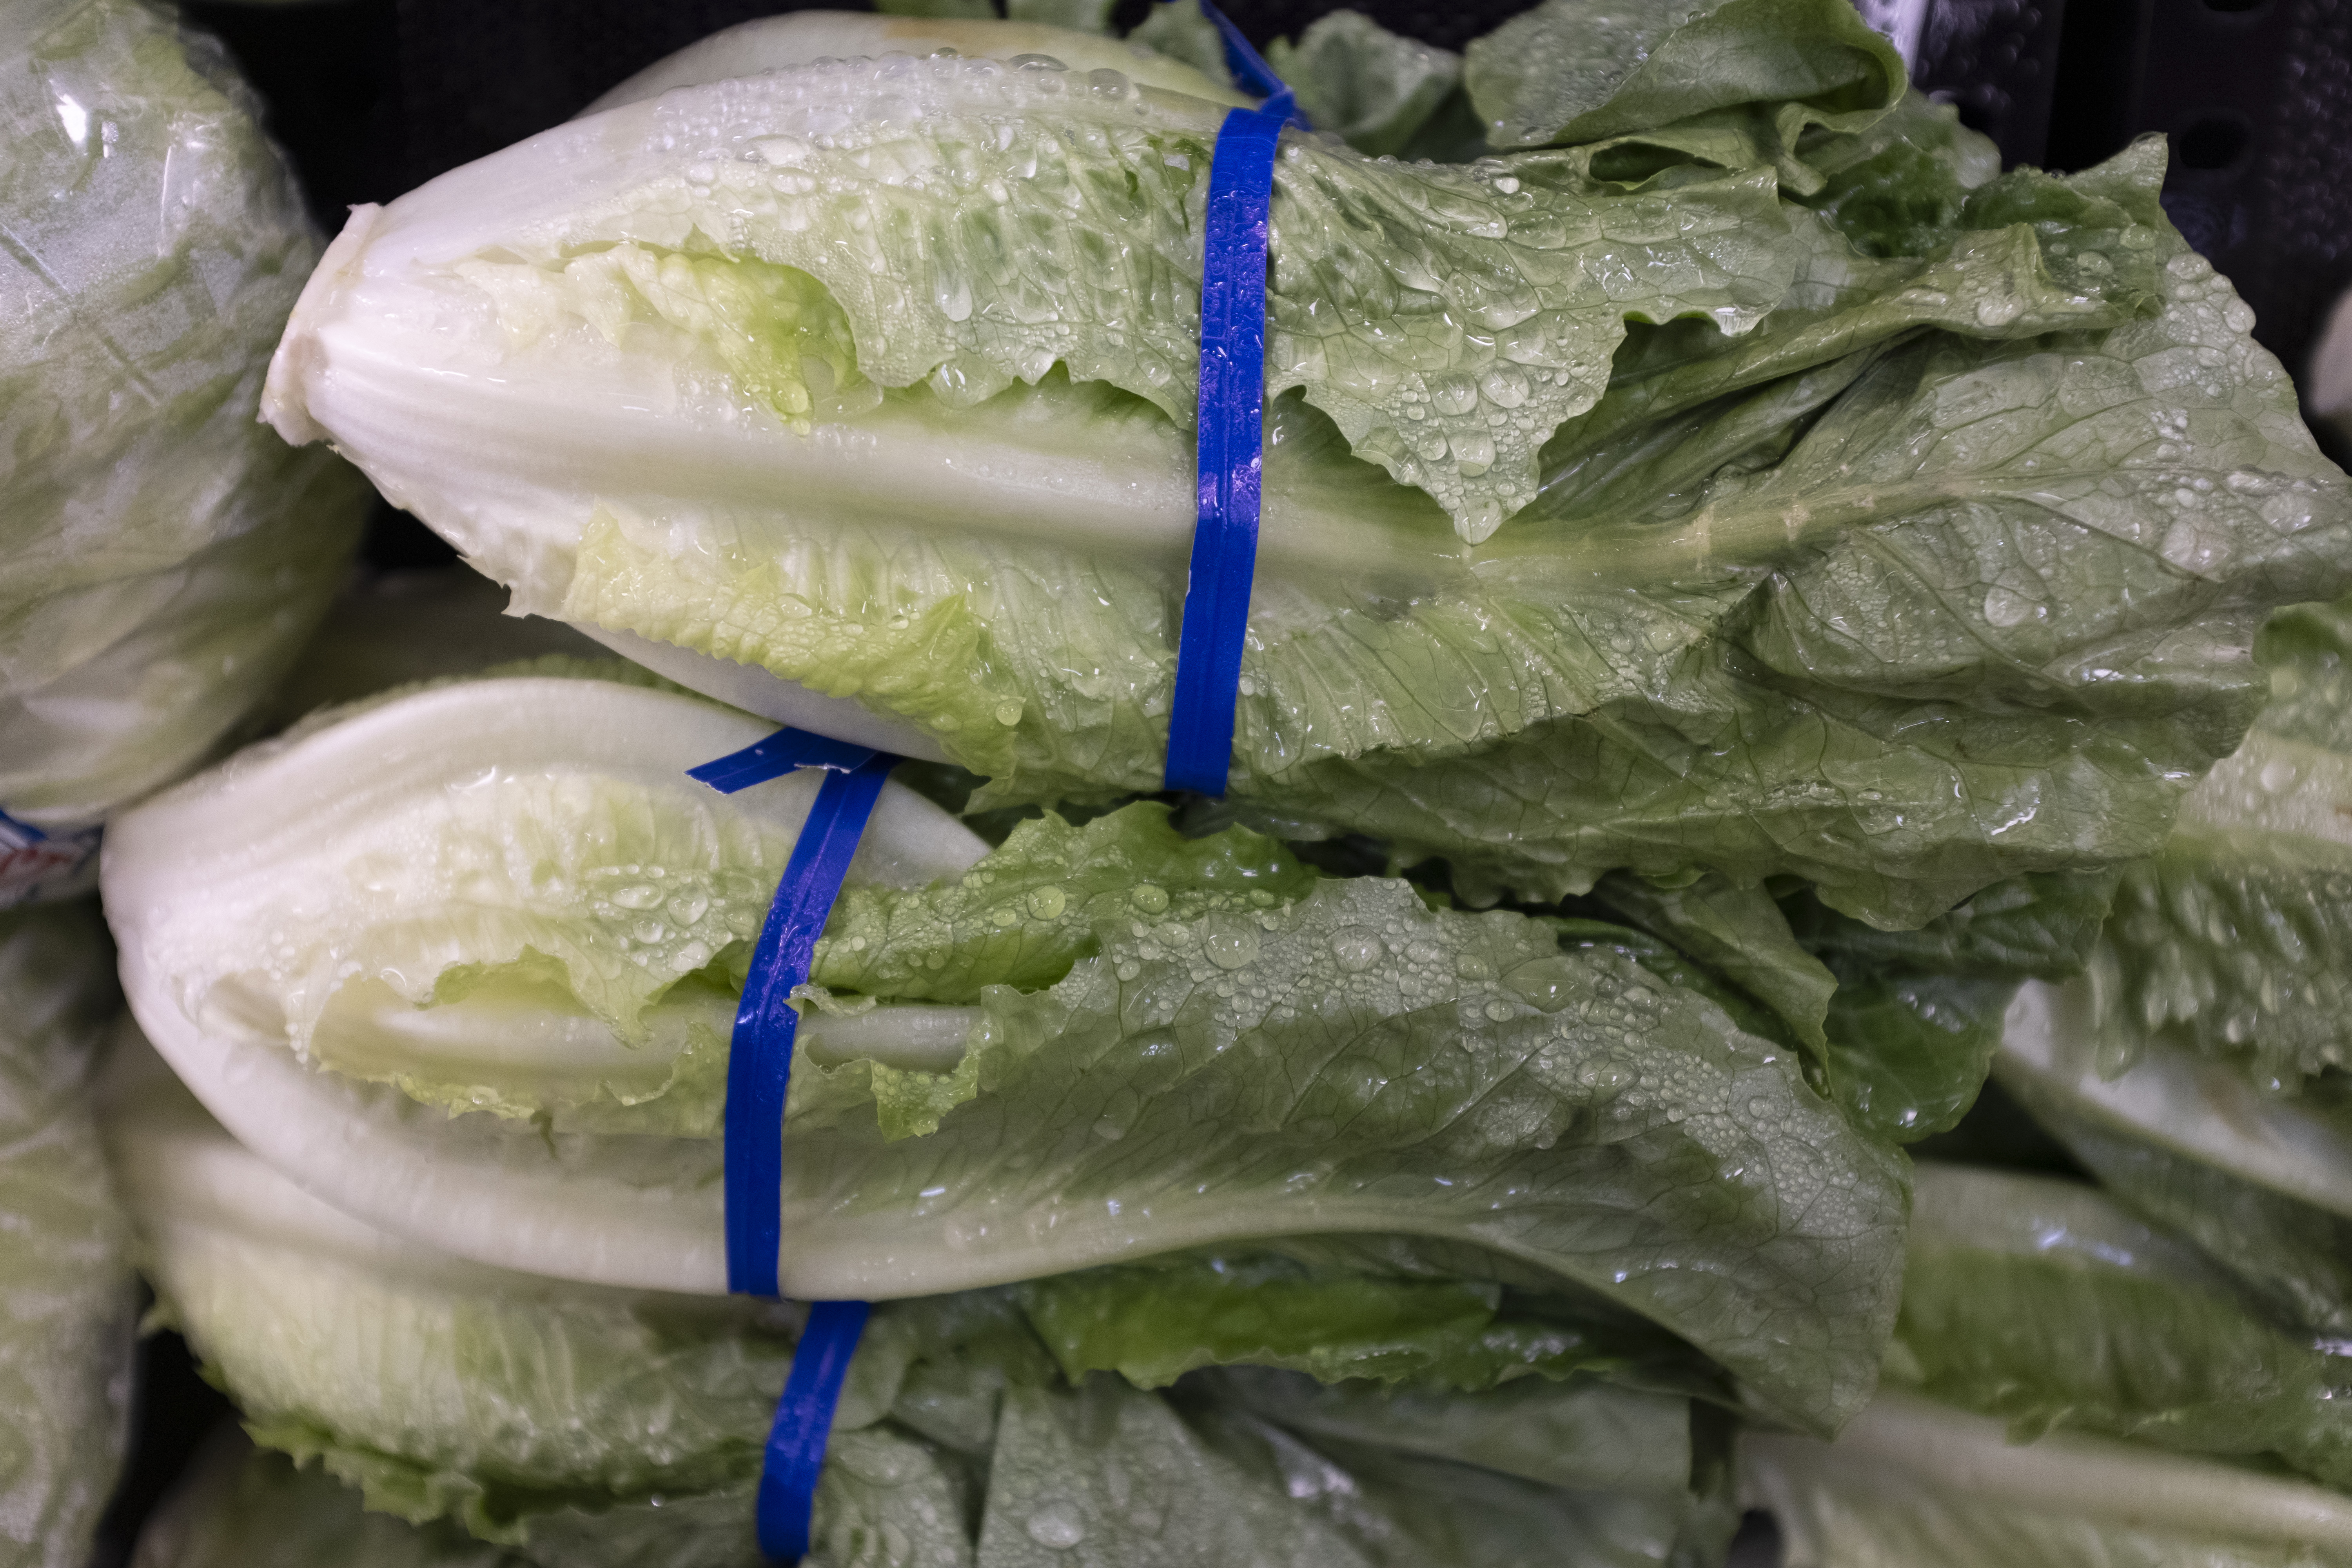 Poopy Lettuce Strikes Again Sickening 67 With E Coli Tainted